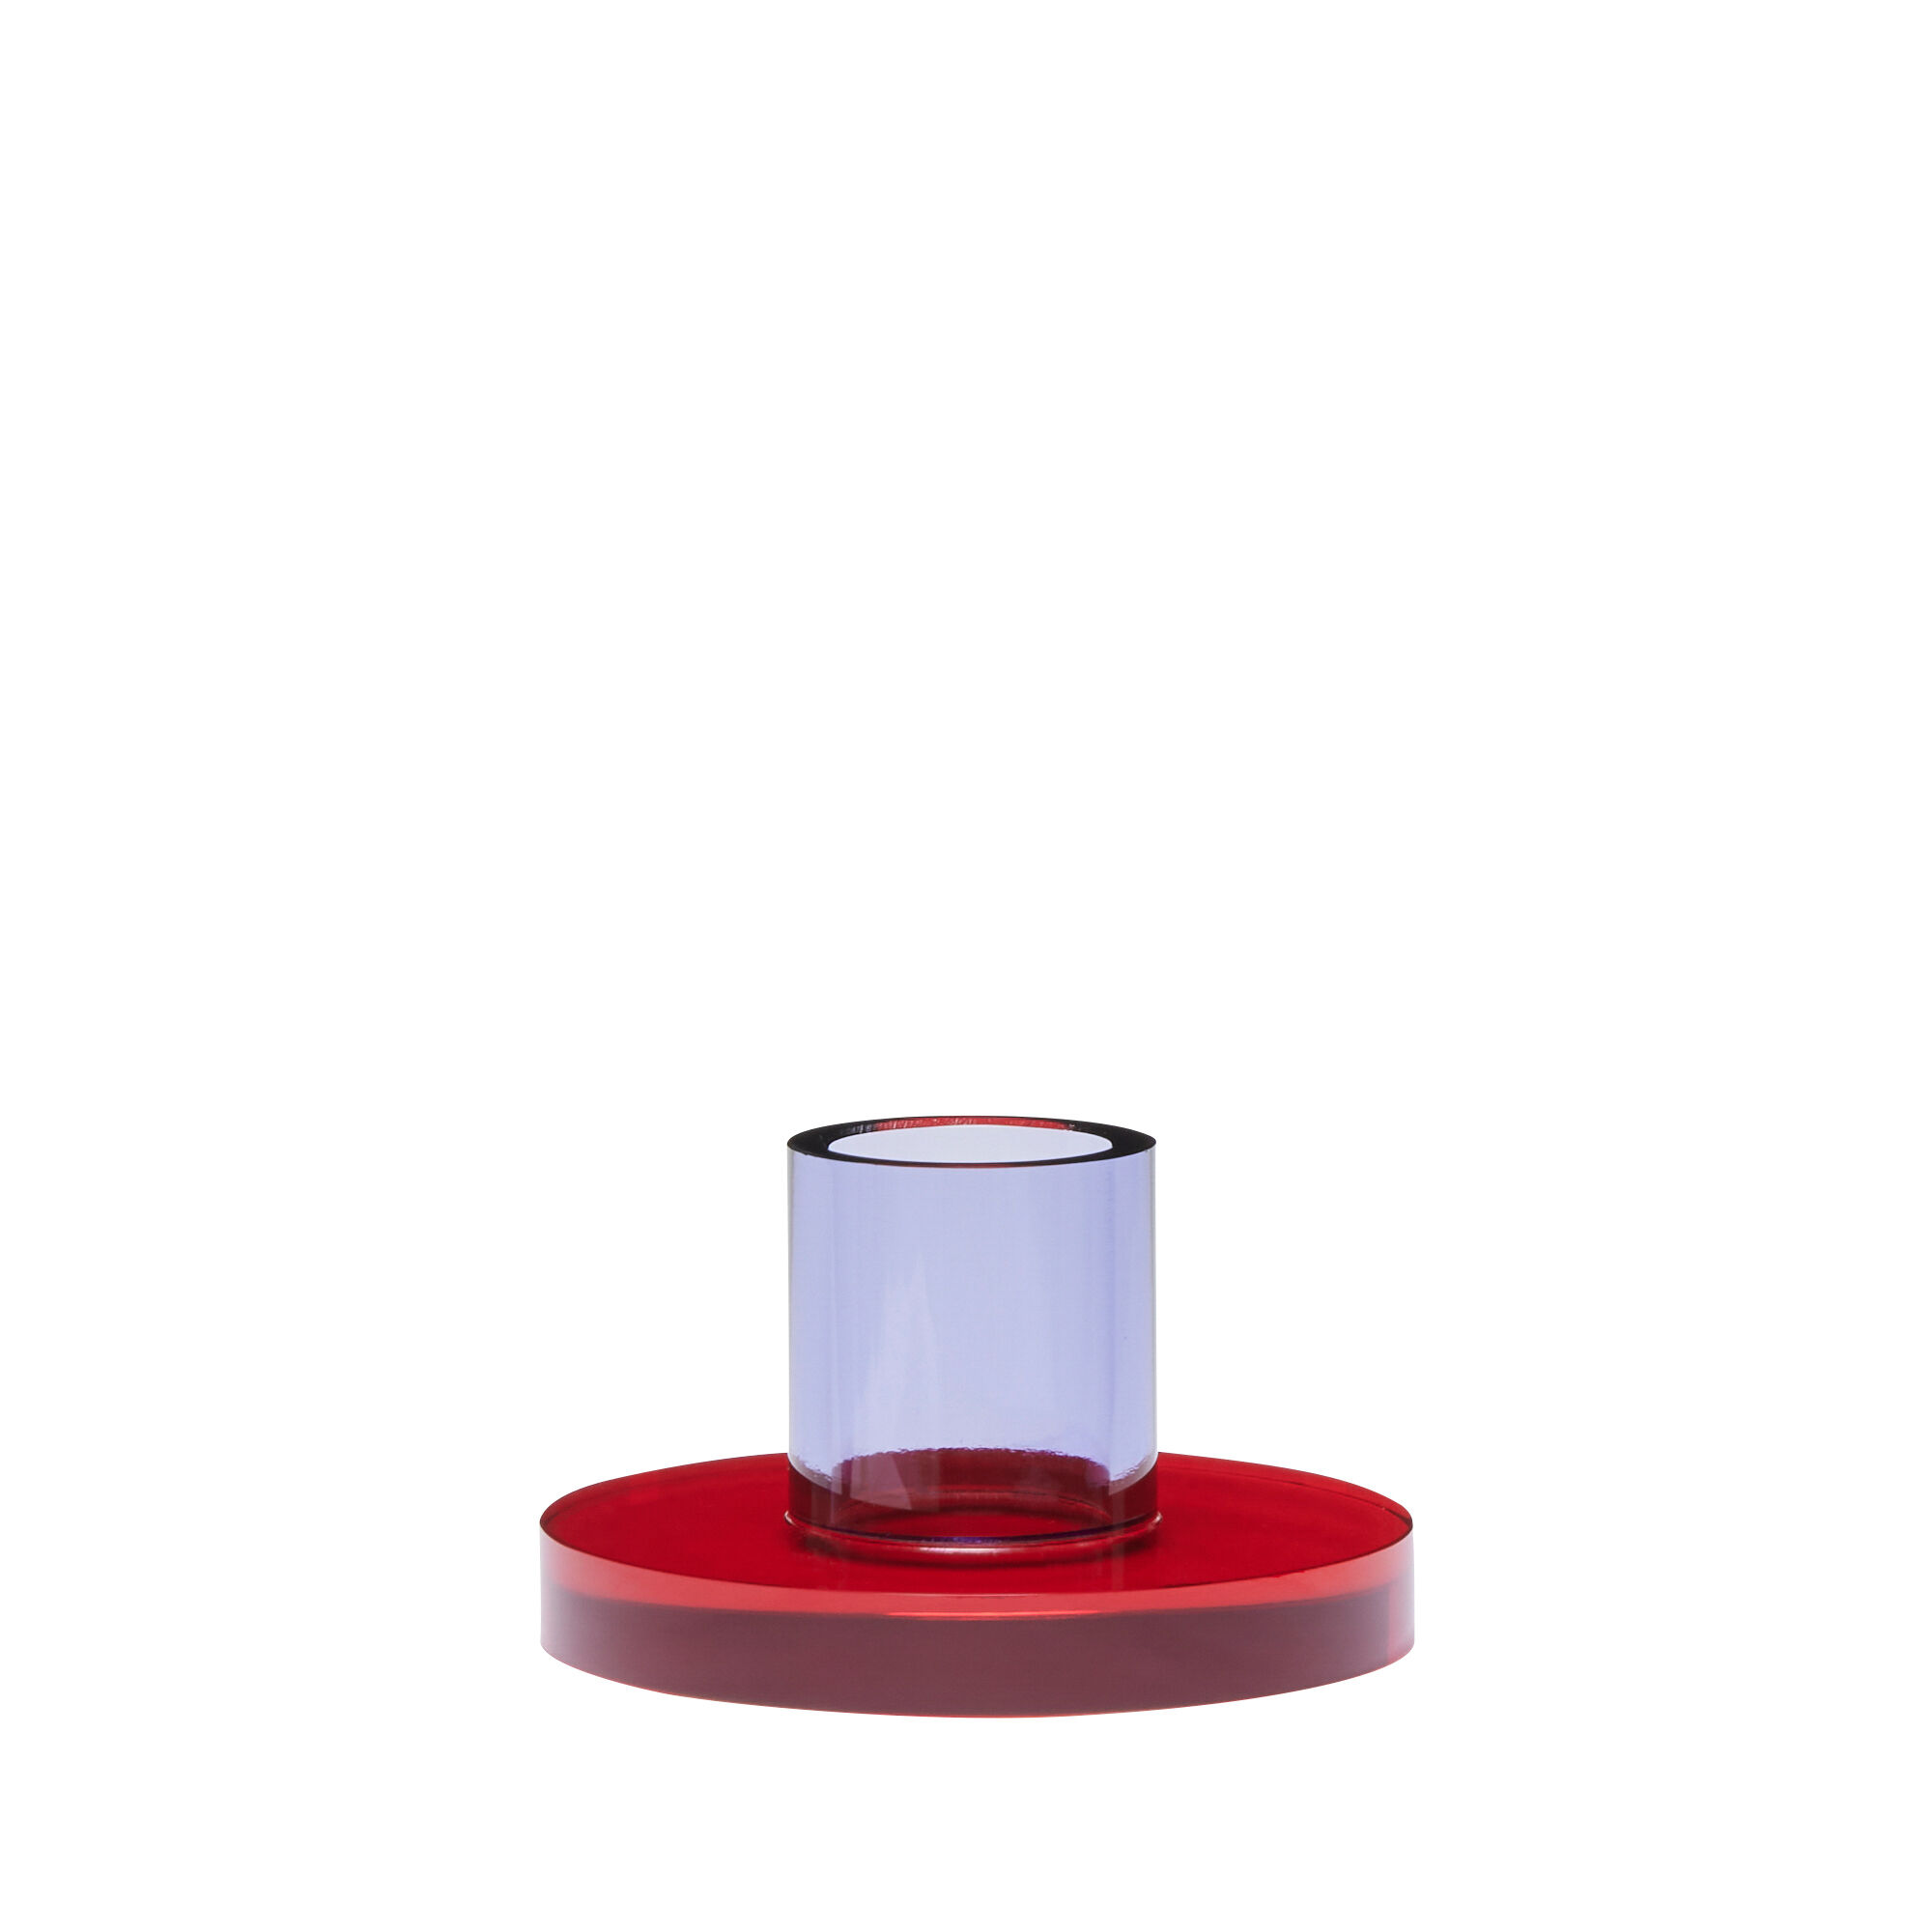 Hubsch Astra Candleholder Small in Red, Purple